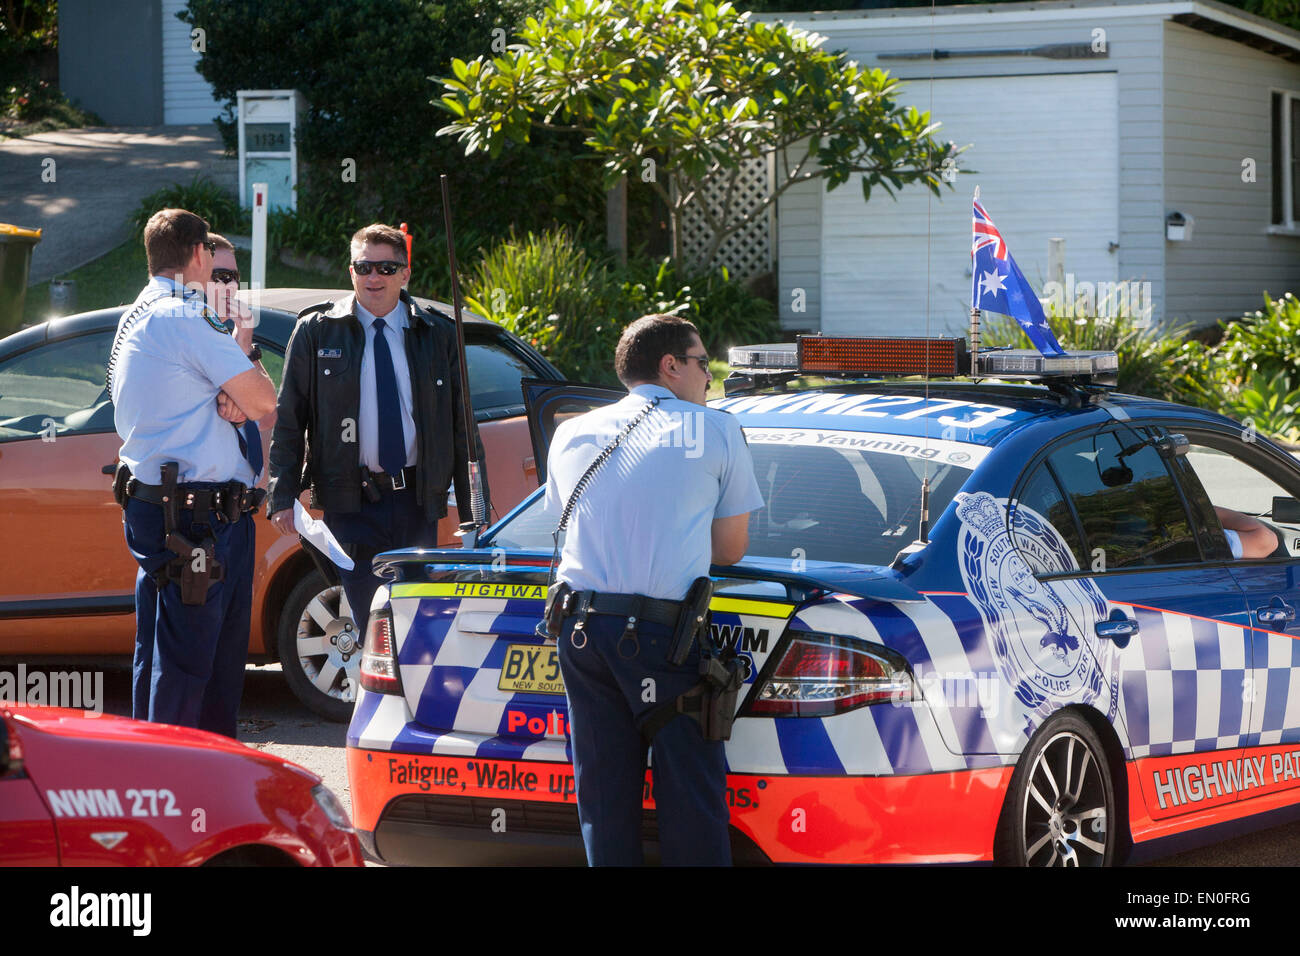 Sydney, Australia. 25th Apr, 2015. Centenary ANZAC day remembrance service and march on 25th april at palm beach sydney  to remember those who perished in world war one at Gallipoli. NSW Sydney police officers on patrol with their police car Credit:  martin berry/Alamy Live News Stock Photo